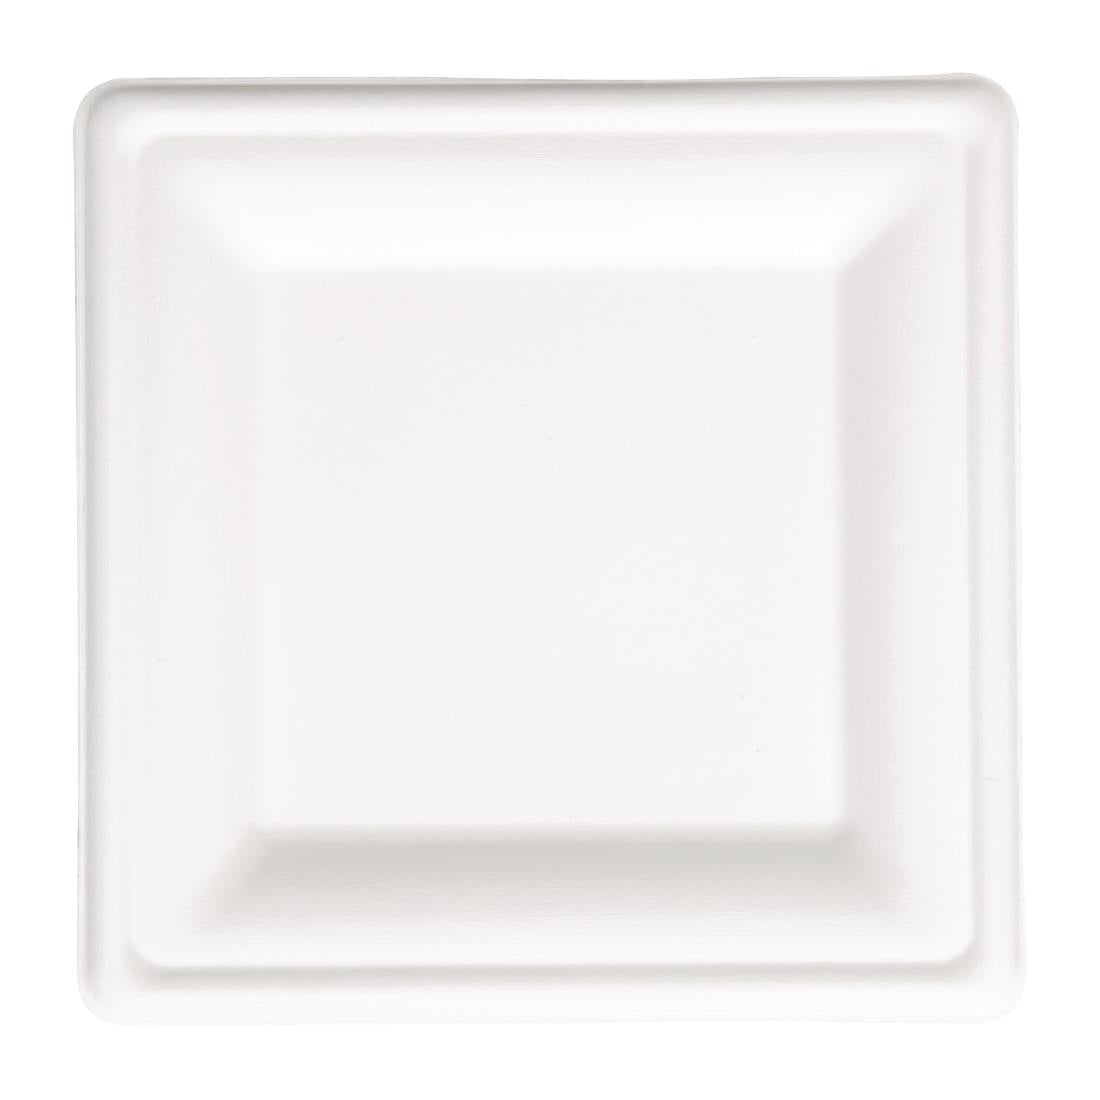 FC520 Fiesta Compostable Bagasse Square Plates 261mm (Pack of 50) JD Catering Equipment Solutions Ltd